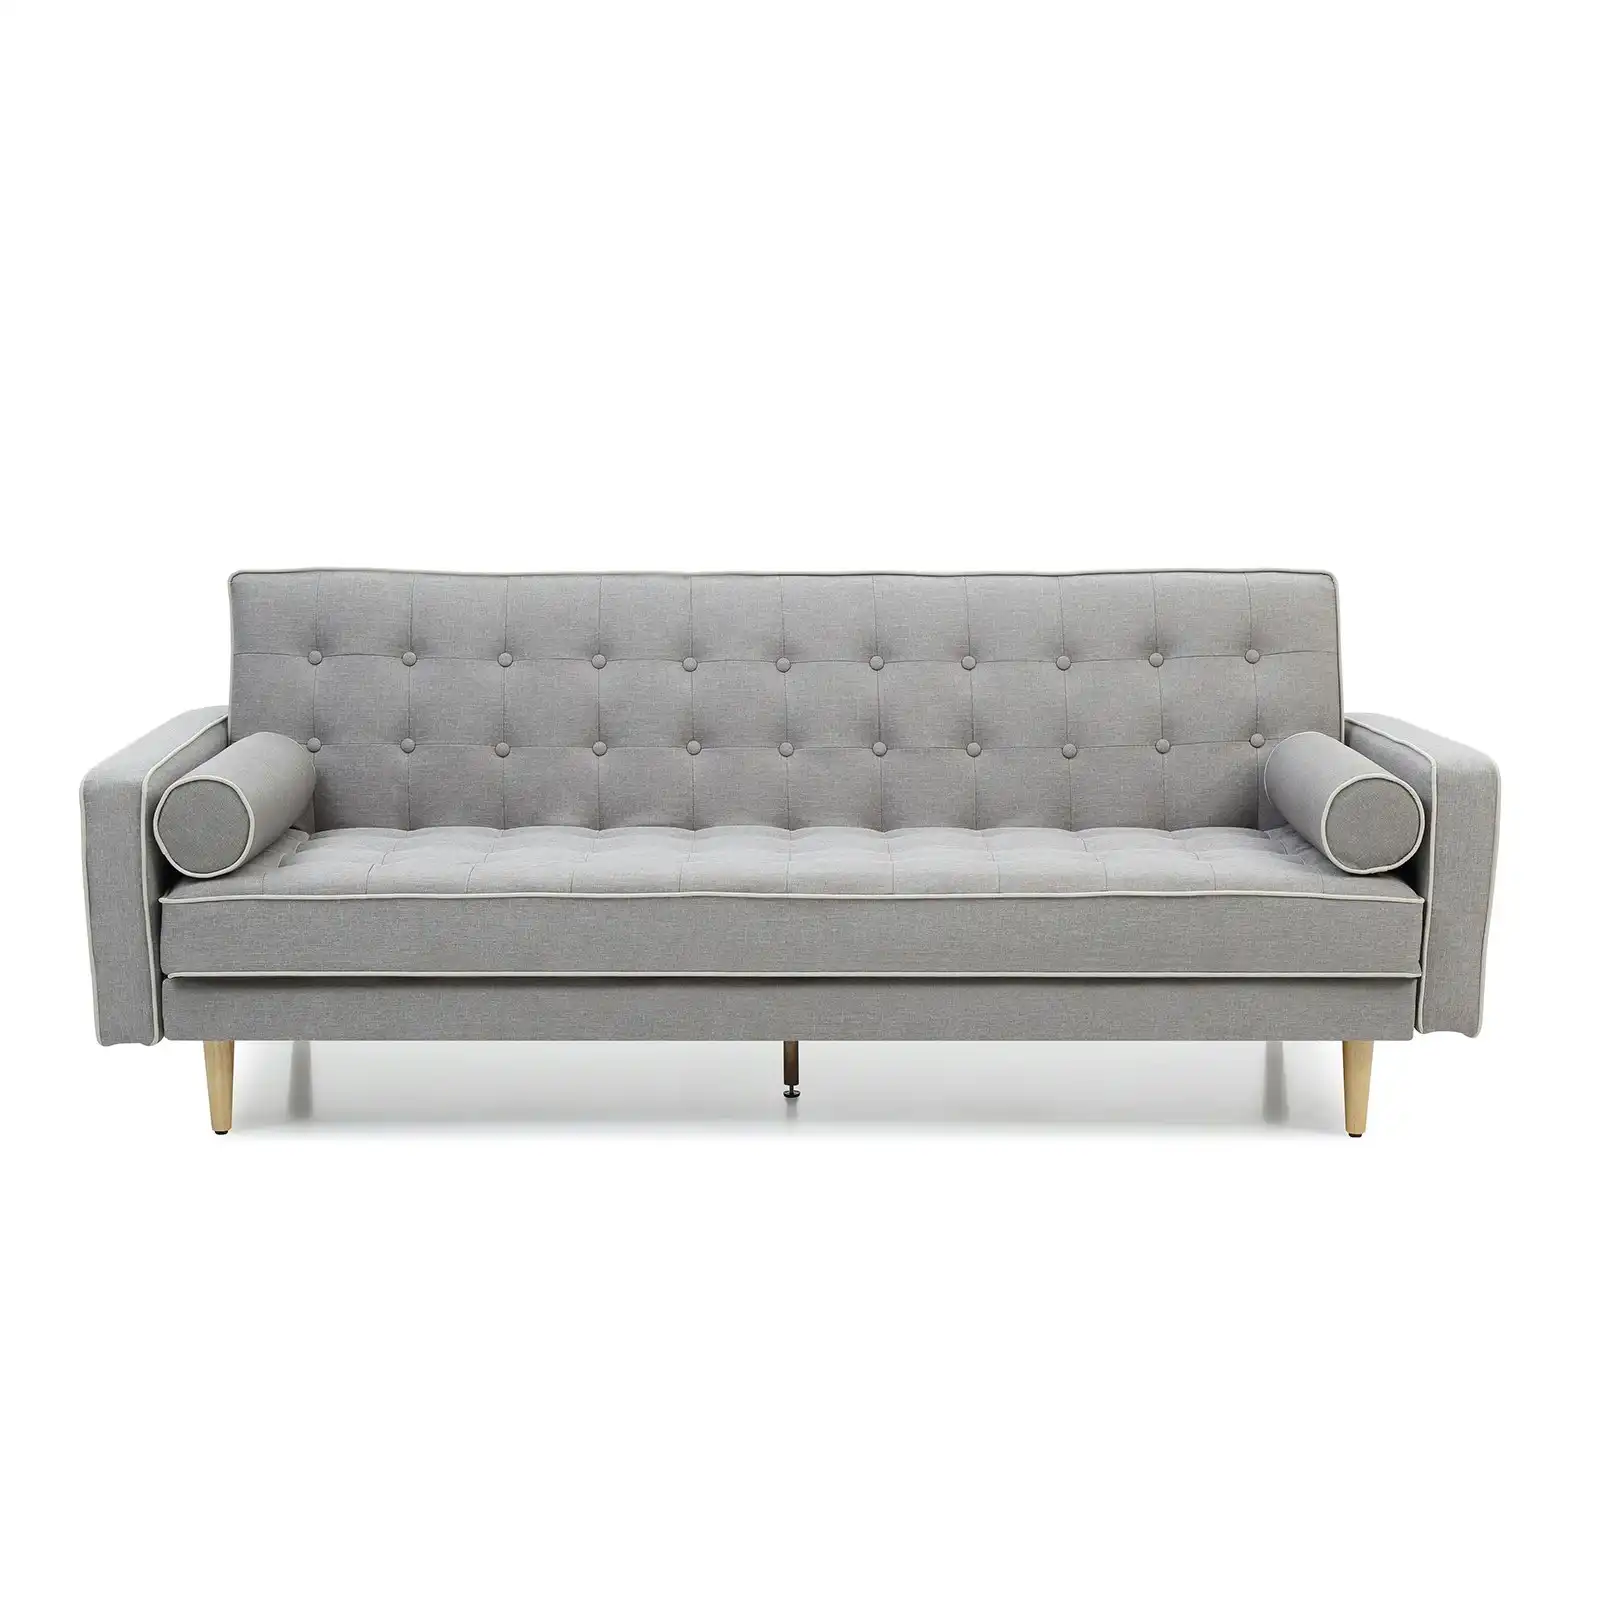 Sofia sofa bed SP068 - Grey BL201 (with contrast piping)